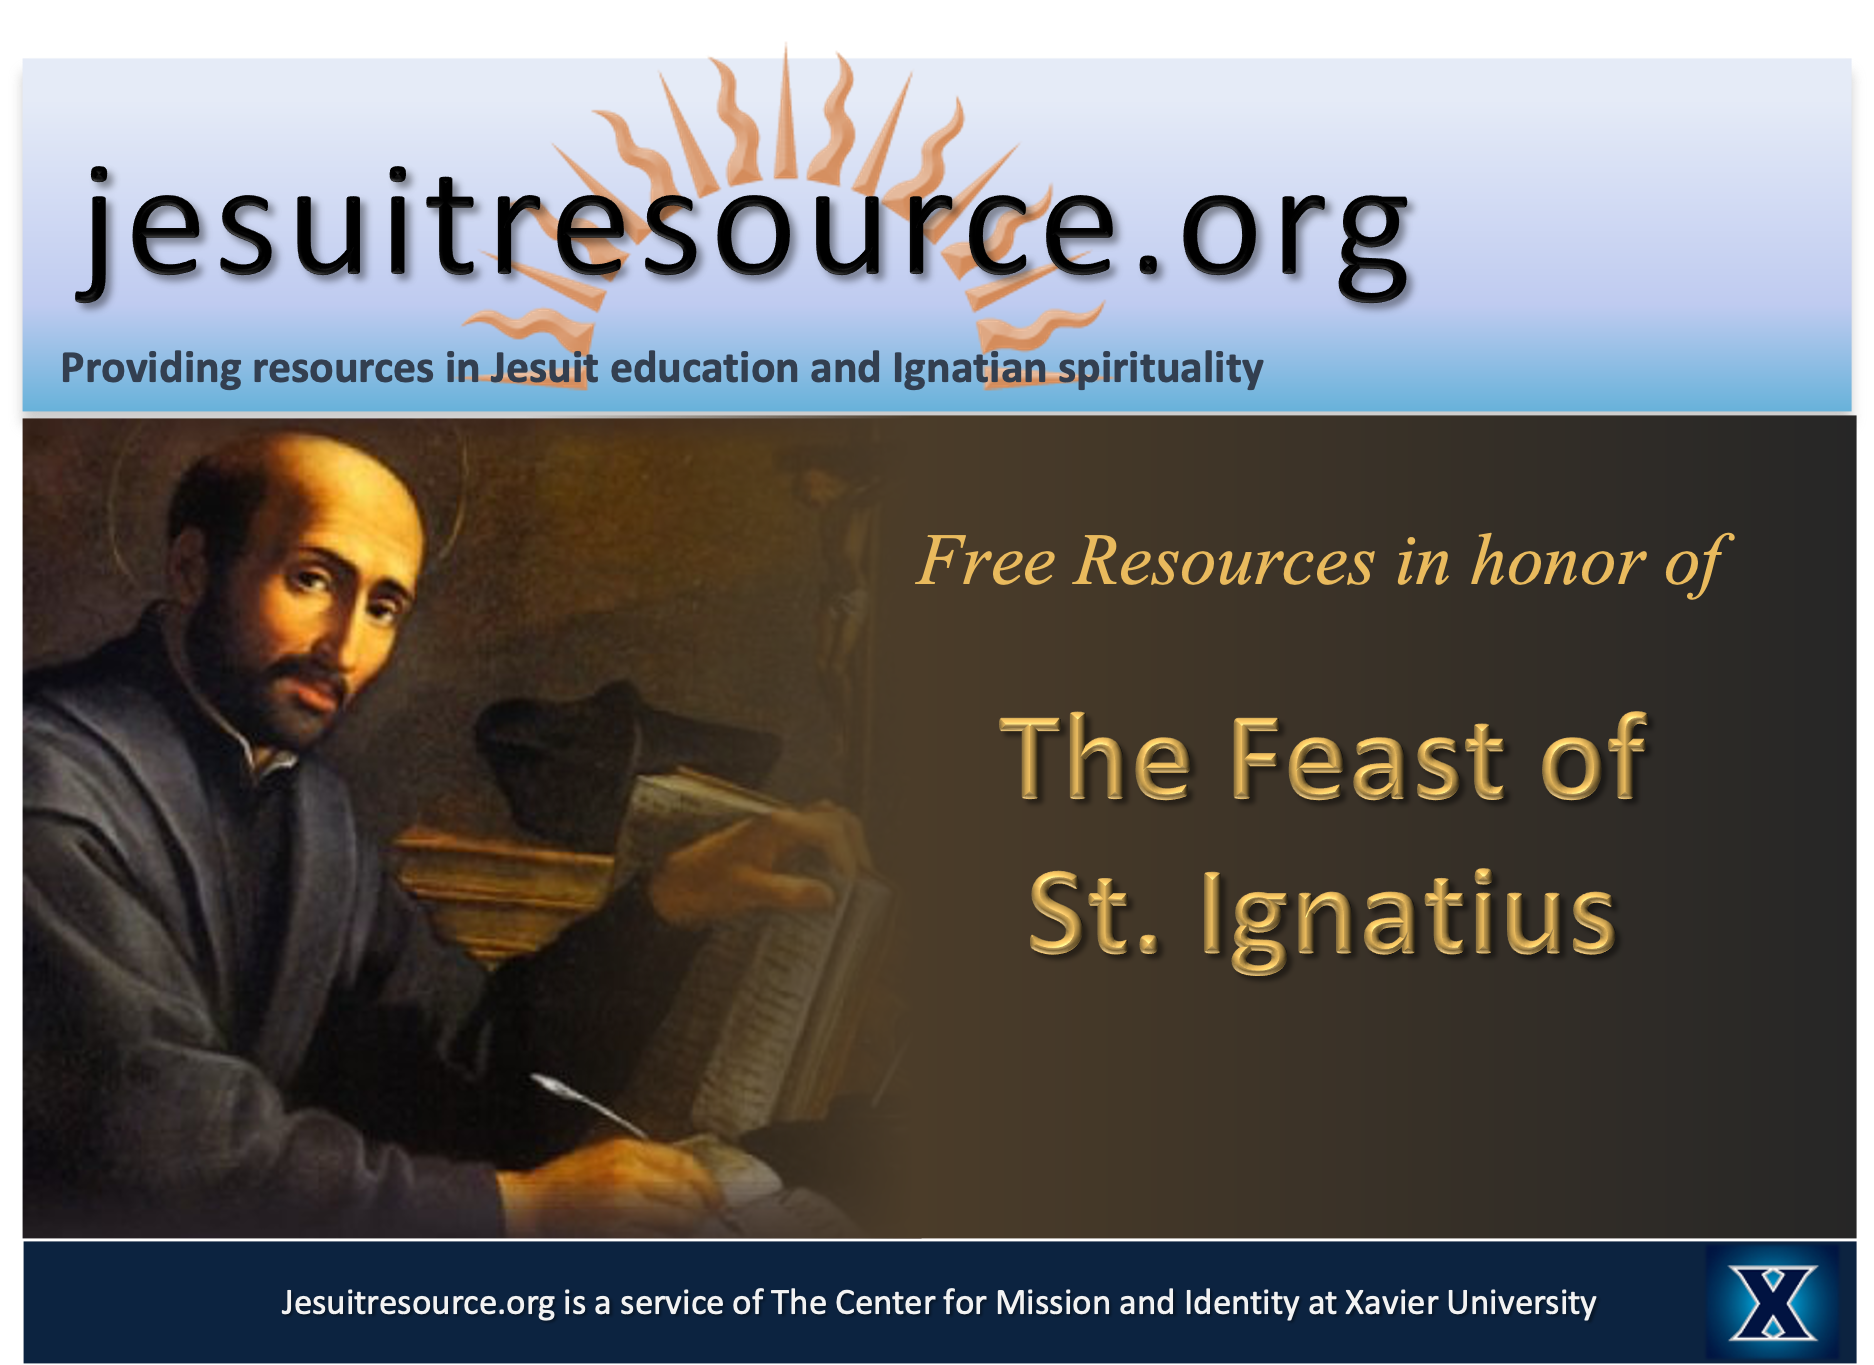 2022-in-honor-of-the-feast-of-st.-ignatius.png